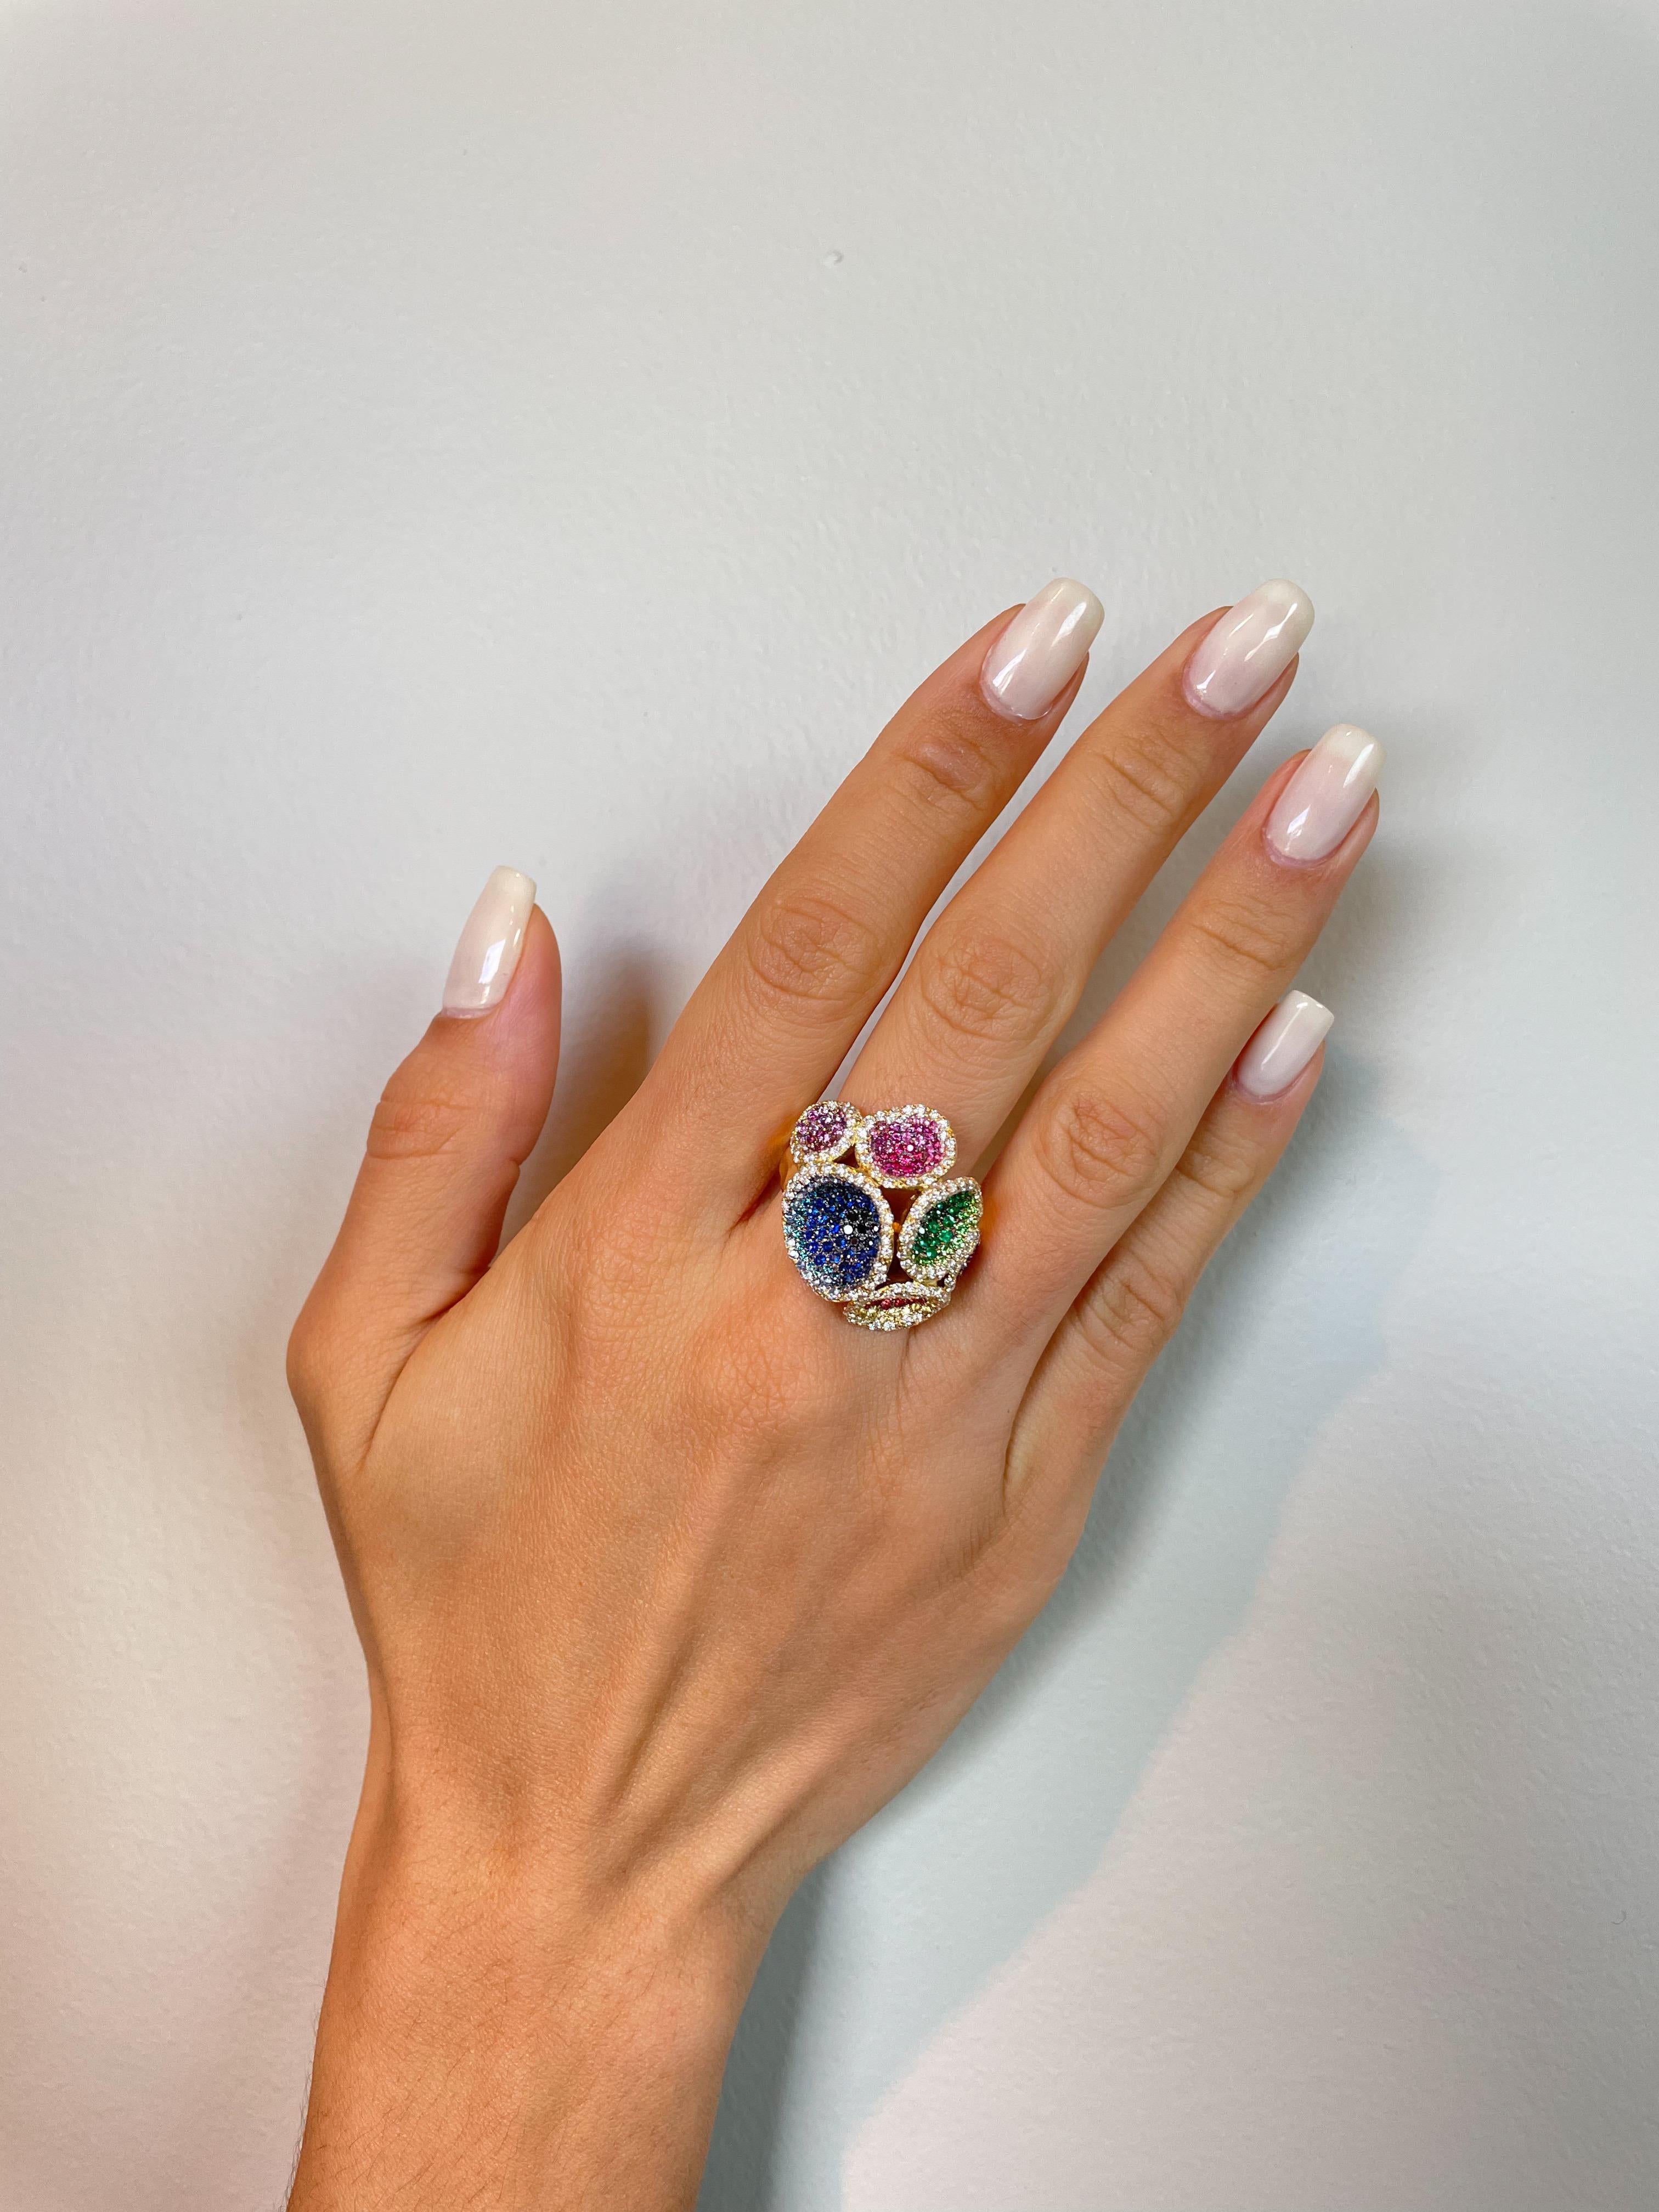 Rosior Contemporary Cocktail Ring featuring different size Corals made in Yellow Gold and set with:
- 214 Colorless (F color, VVS clarity) Diamonds with 1,07 ct;
- 80 Blue Sapphires with 0,77 ct;
- 63 Purple Sapphires with 0,55 ct; 
- 42 Pink